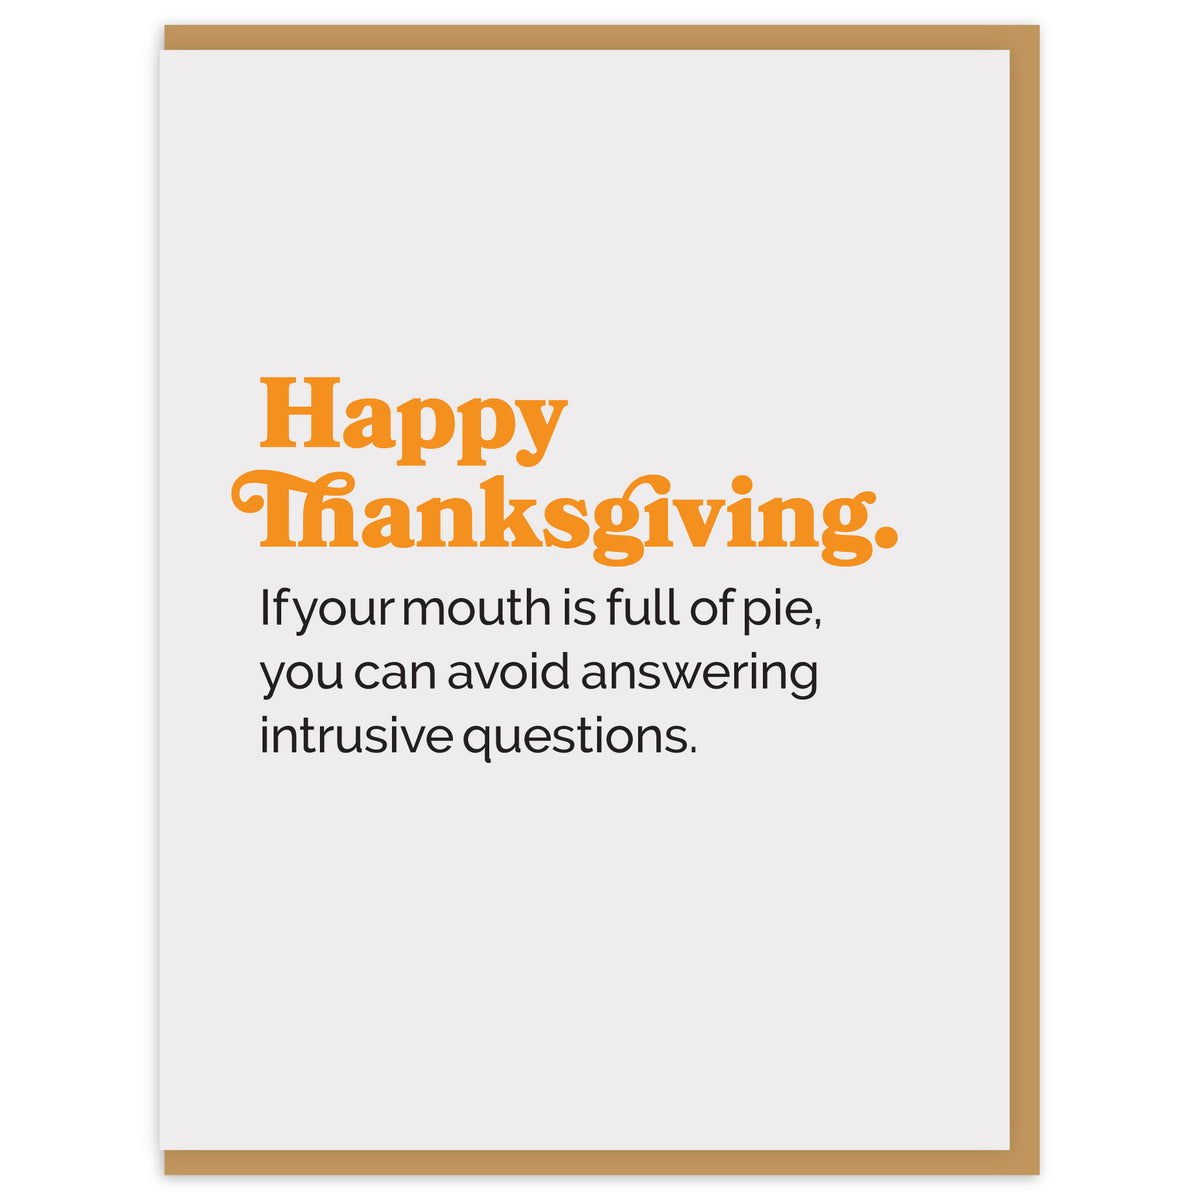 Happy Thanksgiving. If your mouth is full of pie, you can avoid answering intrusive questions.